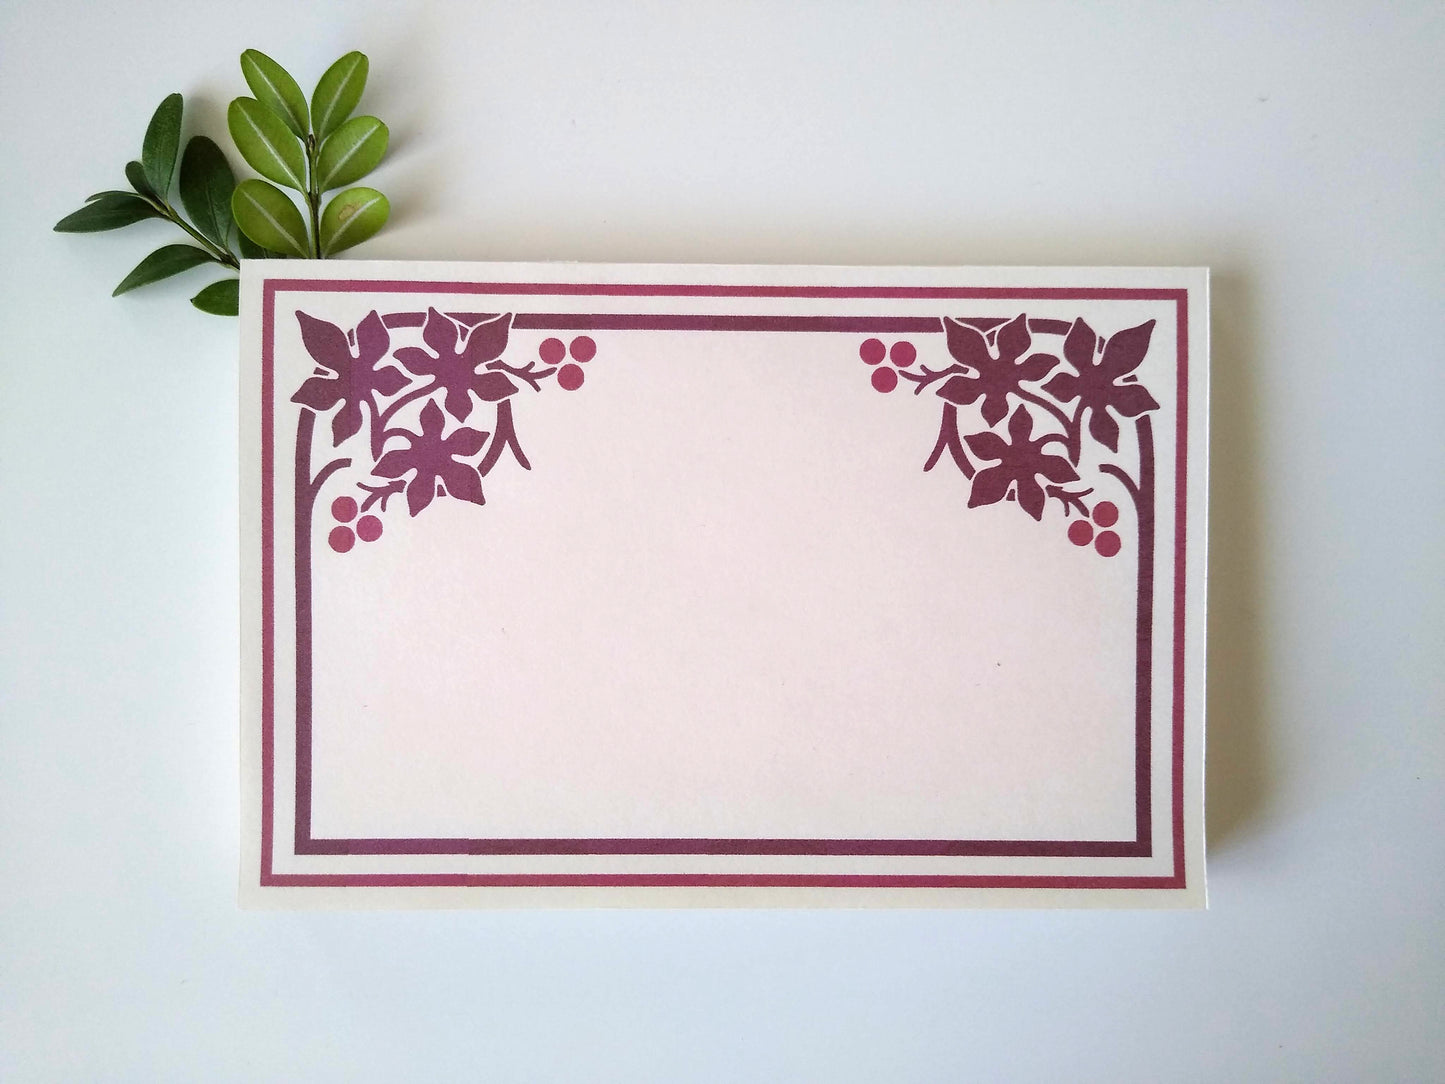 A single notepad with a stylized maple leaf design in both upper corners. There is a double line border around the whole notepad. Two small sprigs of leaves rest under the upper left hand corner.